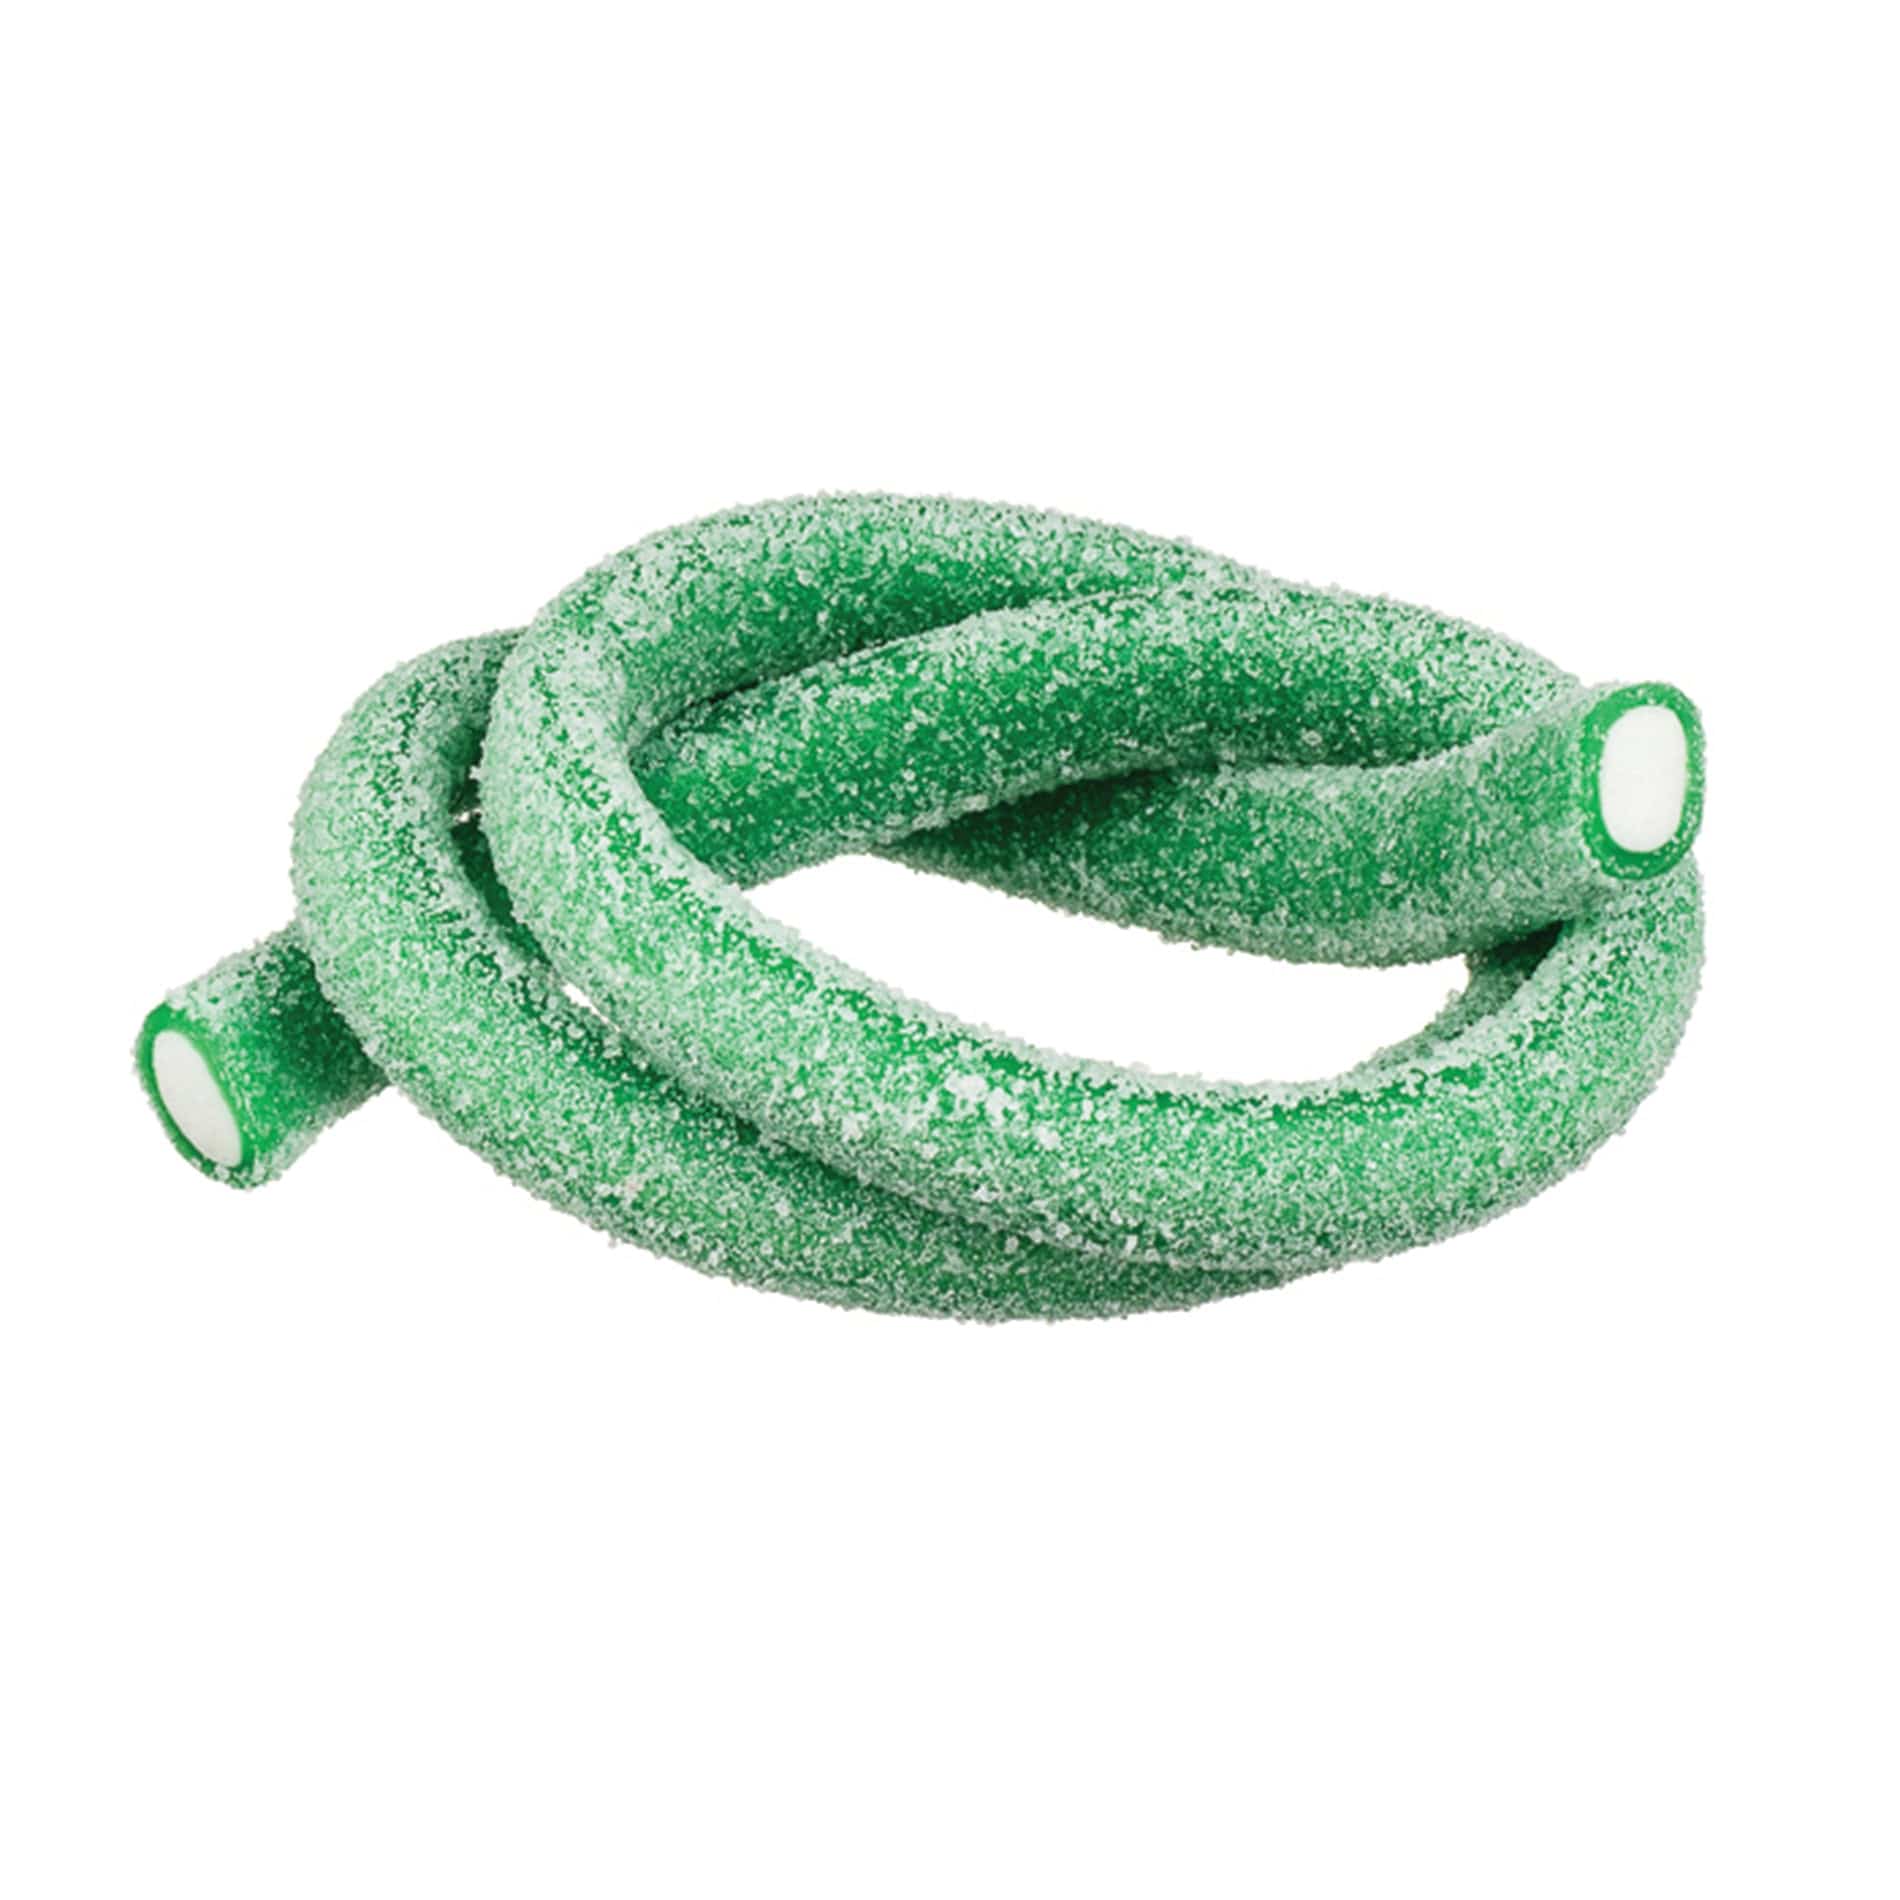 Novelty Concessions Gummy Rope SOUR APPLE / 1 Pack (30 pieces) Meeega Cables European Chewy Rope Candy - Box of 30 individually wrapped Meeega Cables, each over 2-feet long cups with lids and straws